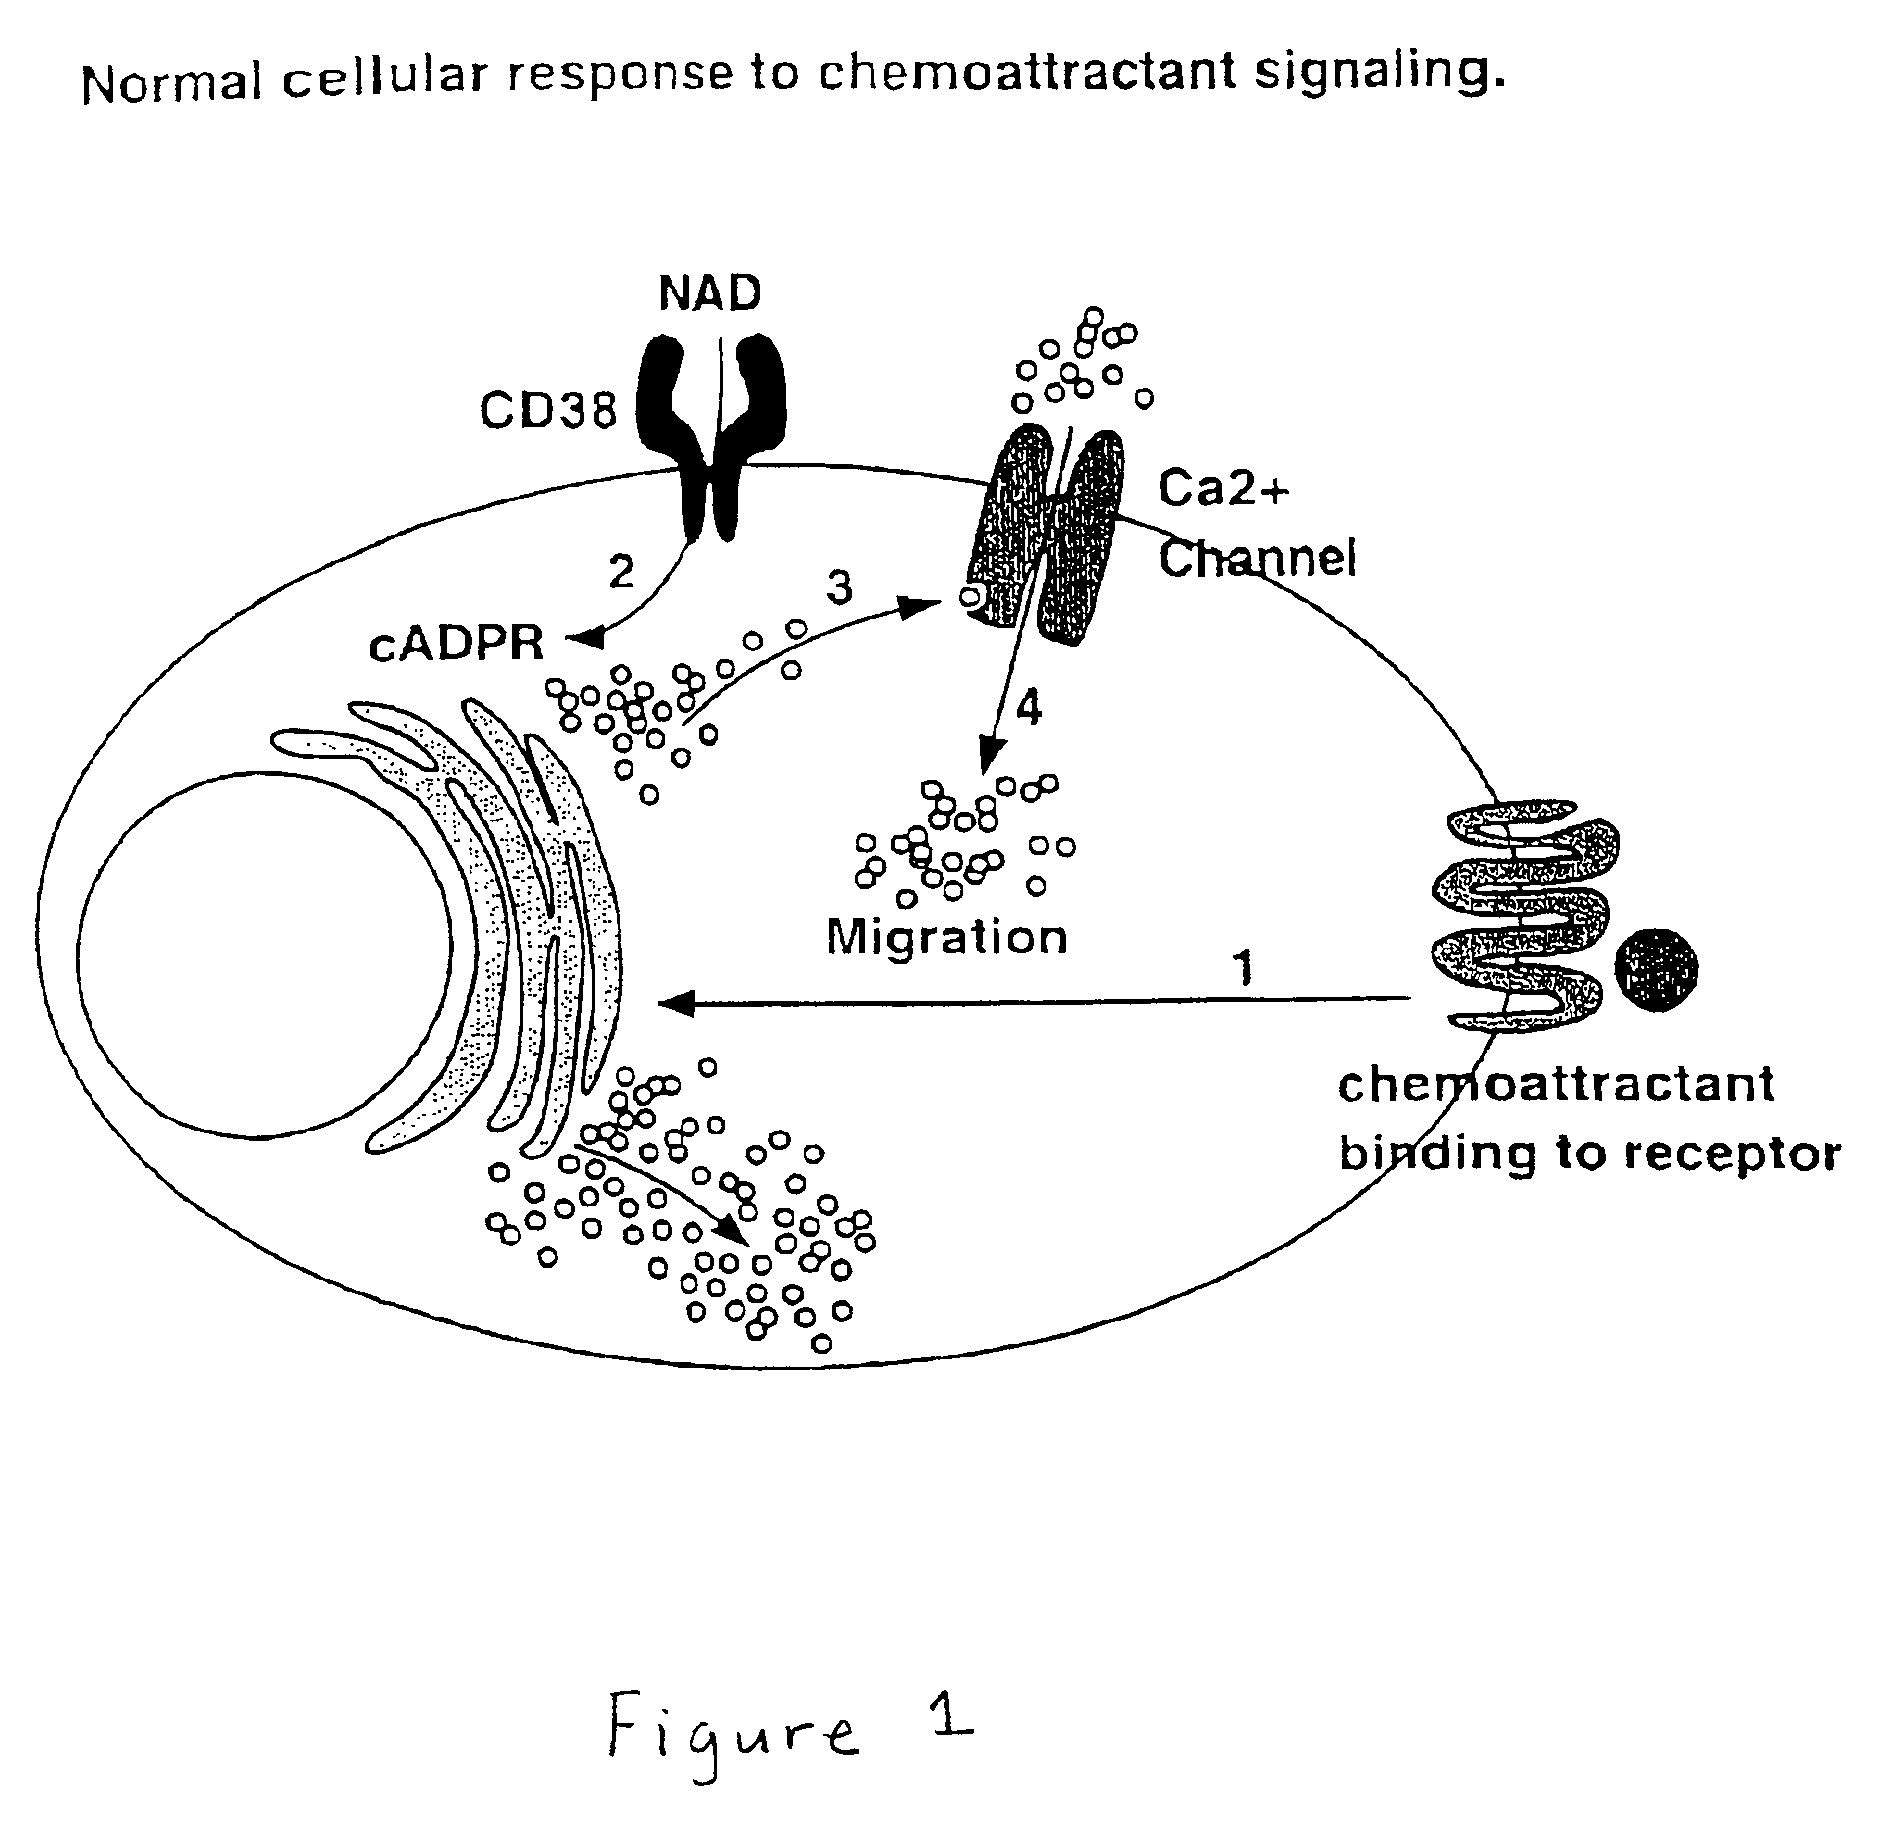 Methods for identifying compounds that inhibit CD38 activity